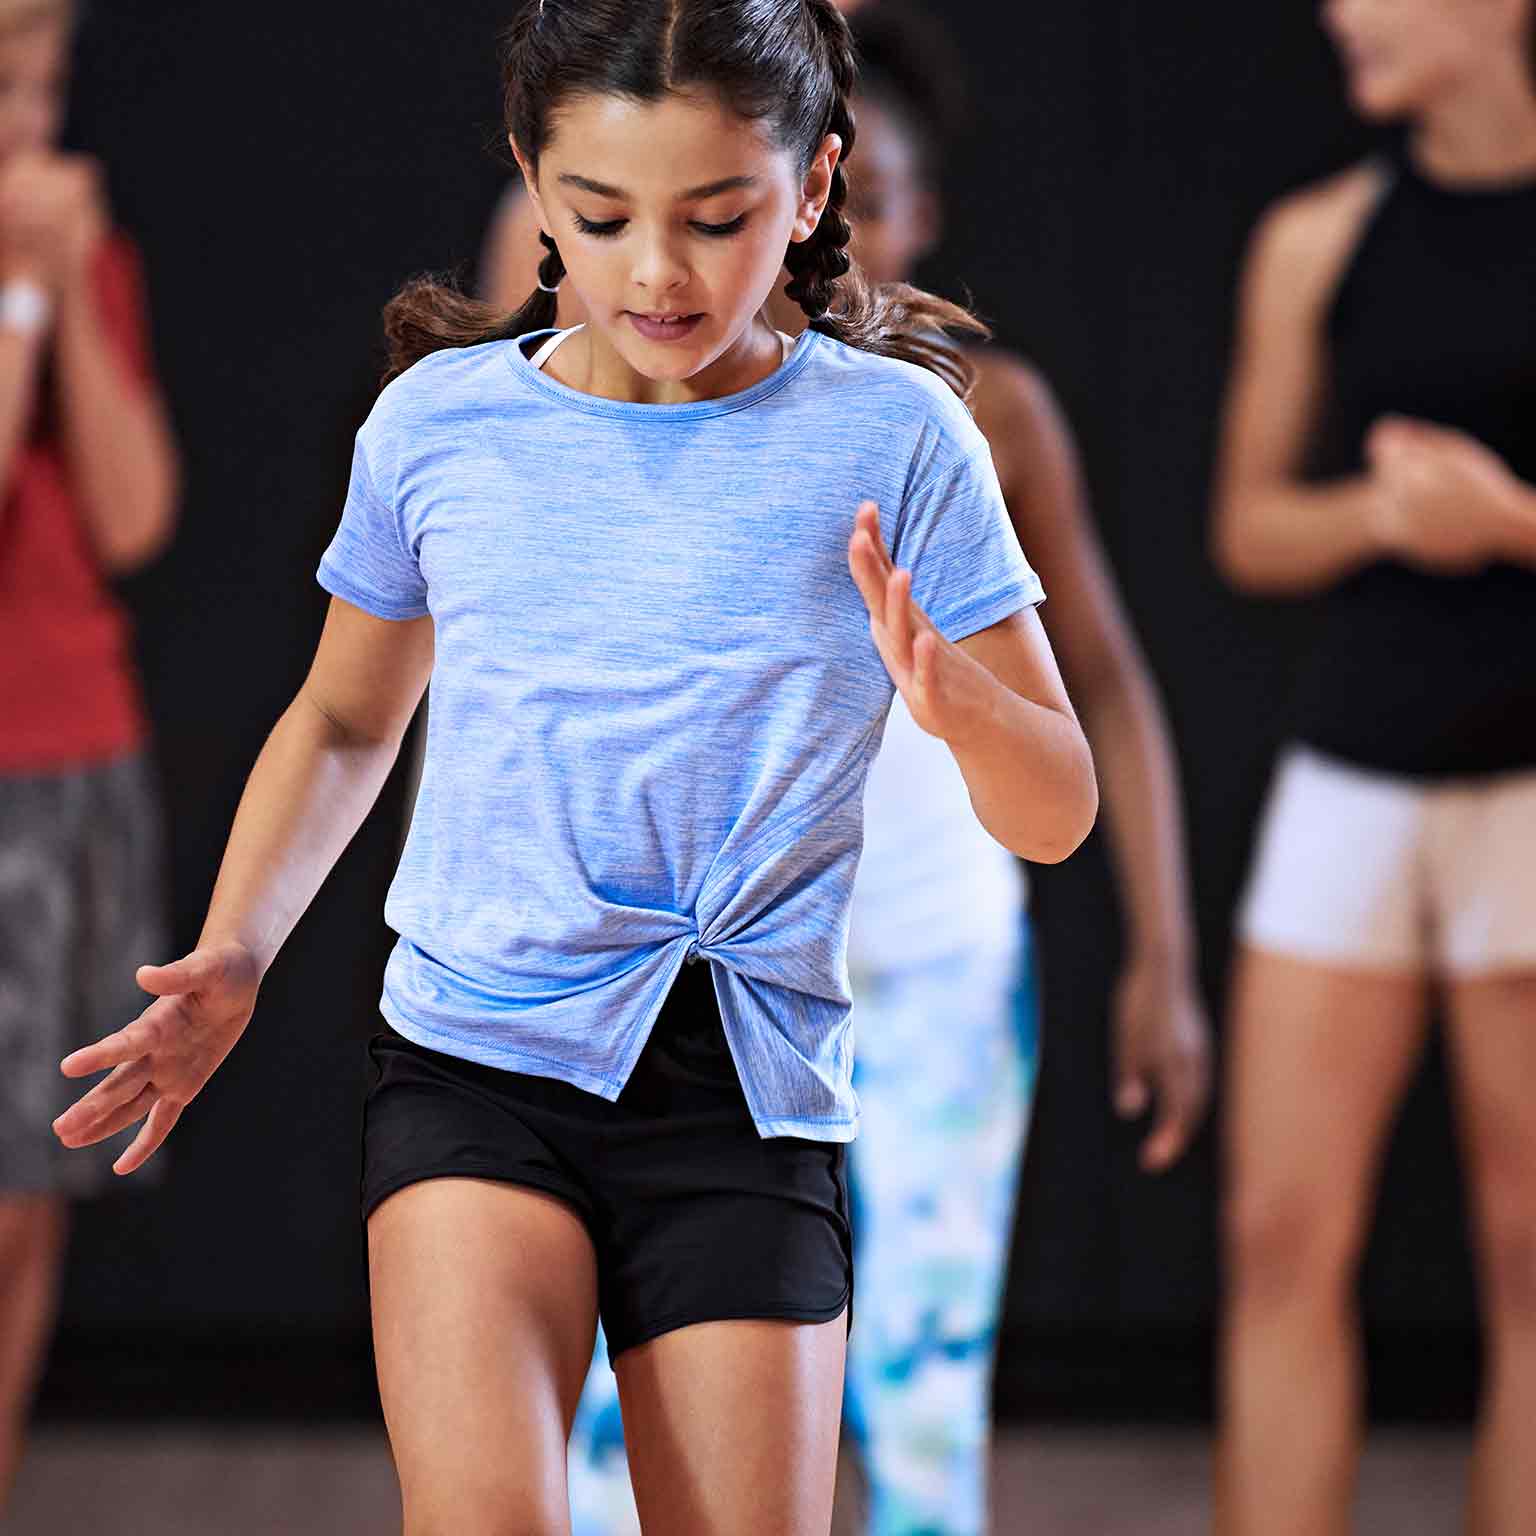 A waist up shot of a girl wearing a light blue t-shirt with brown hair pulled back into two long braids. The looks down at the floor, completely focused on the drill she is doing. Other kids and an adult are visible in the background.